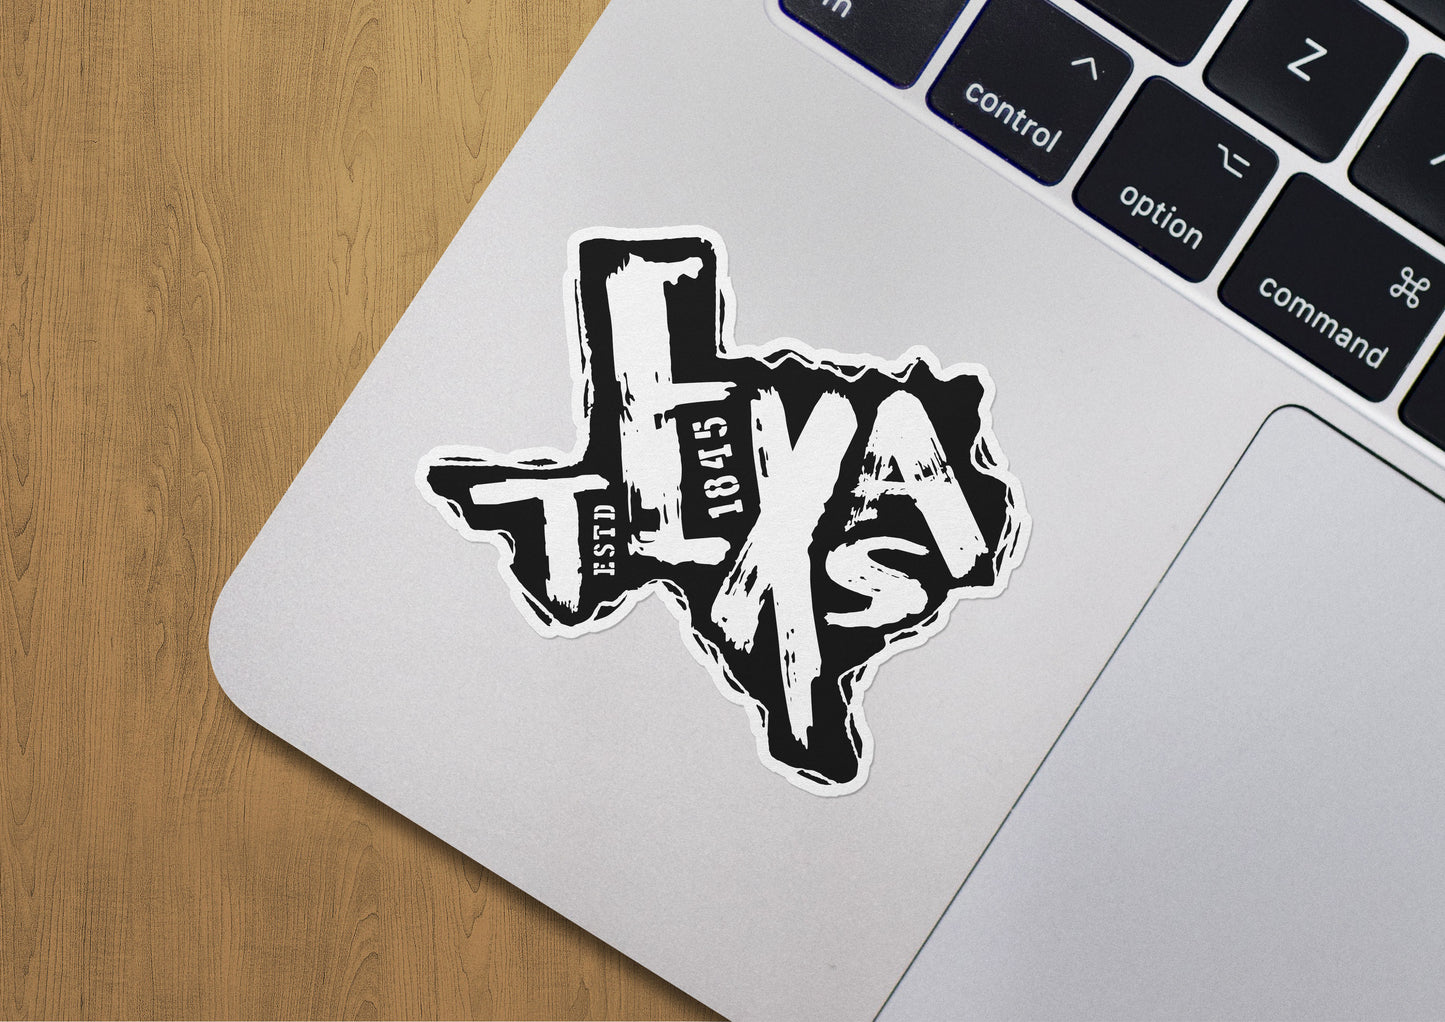 Texas Est. 1845 Decals (2 Pack) (5" and 3")